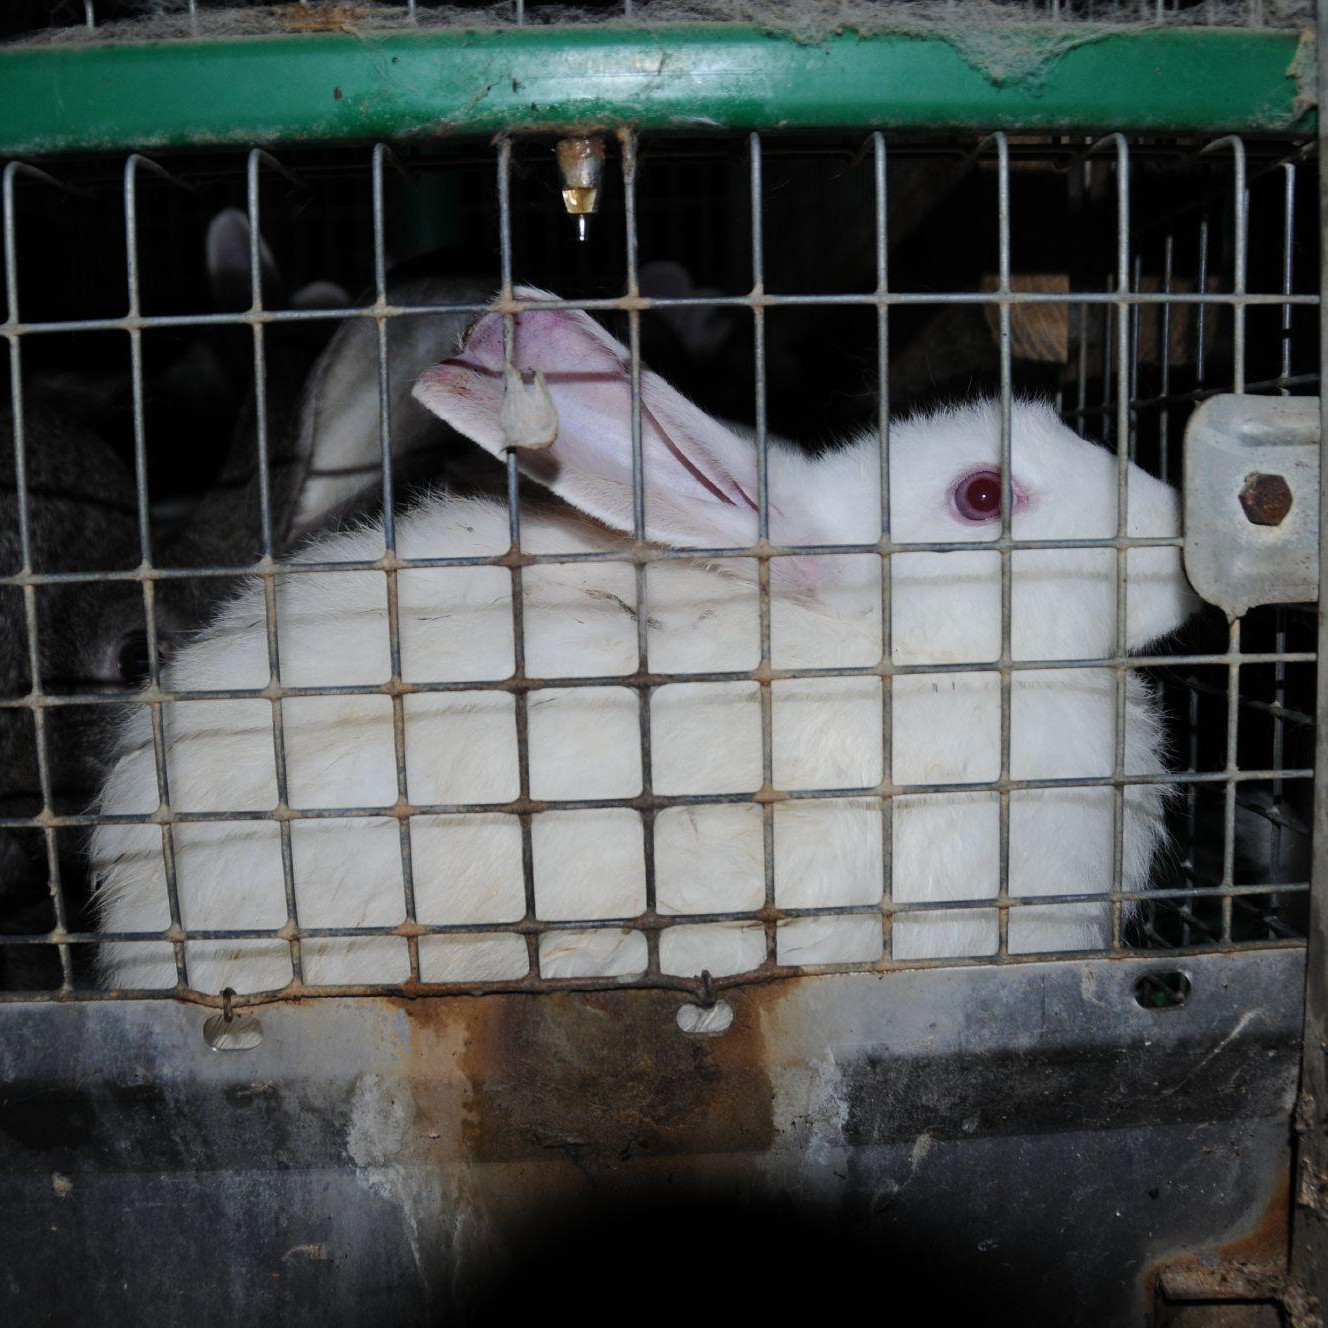 Rabbit inside a cage